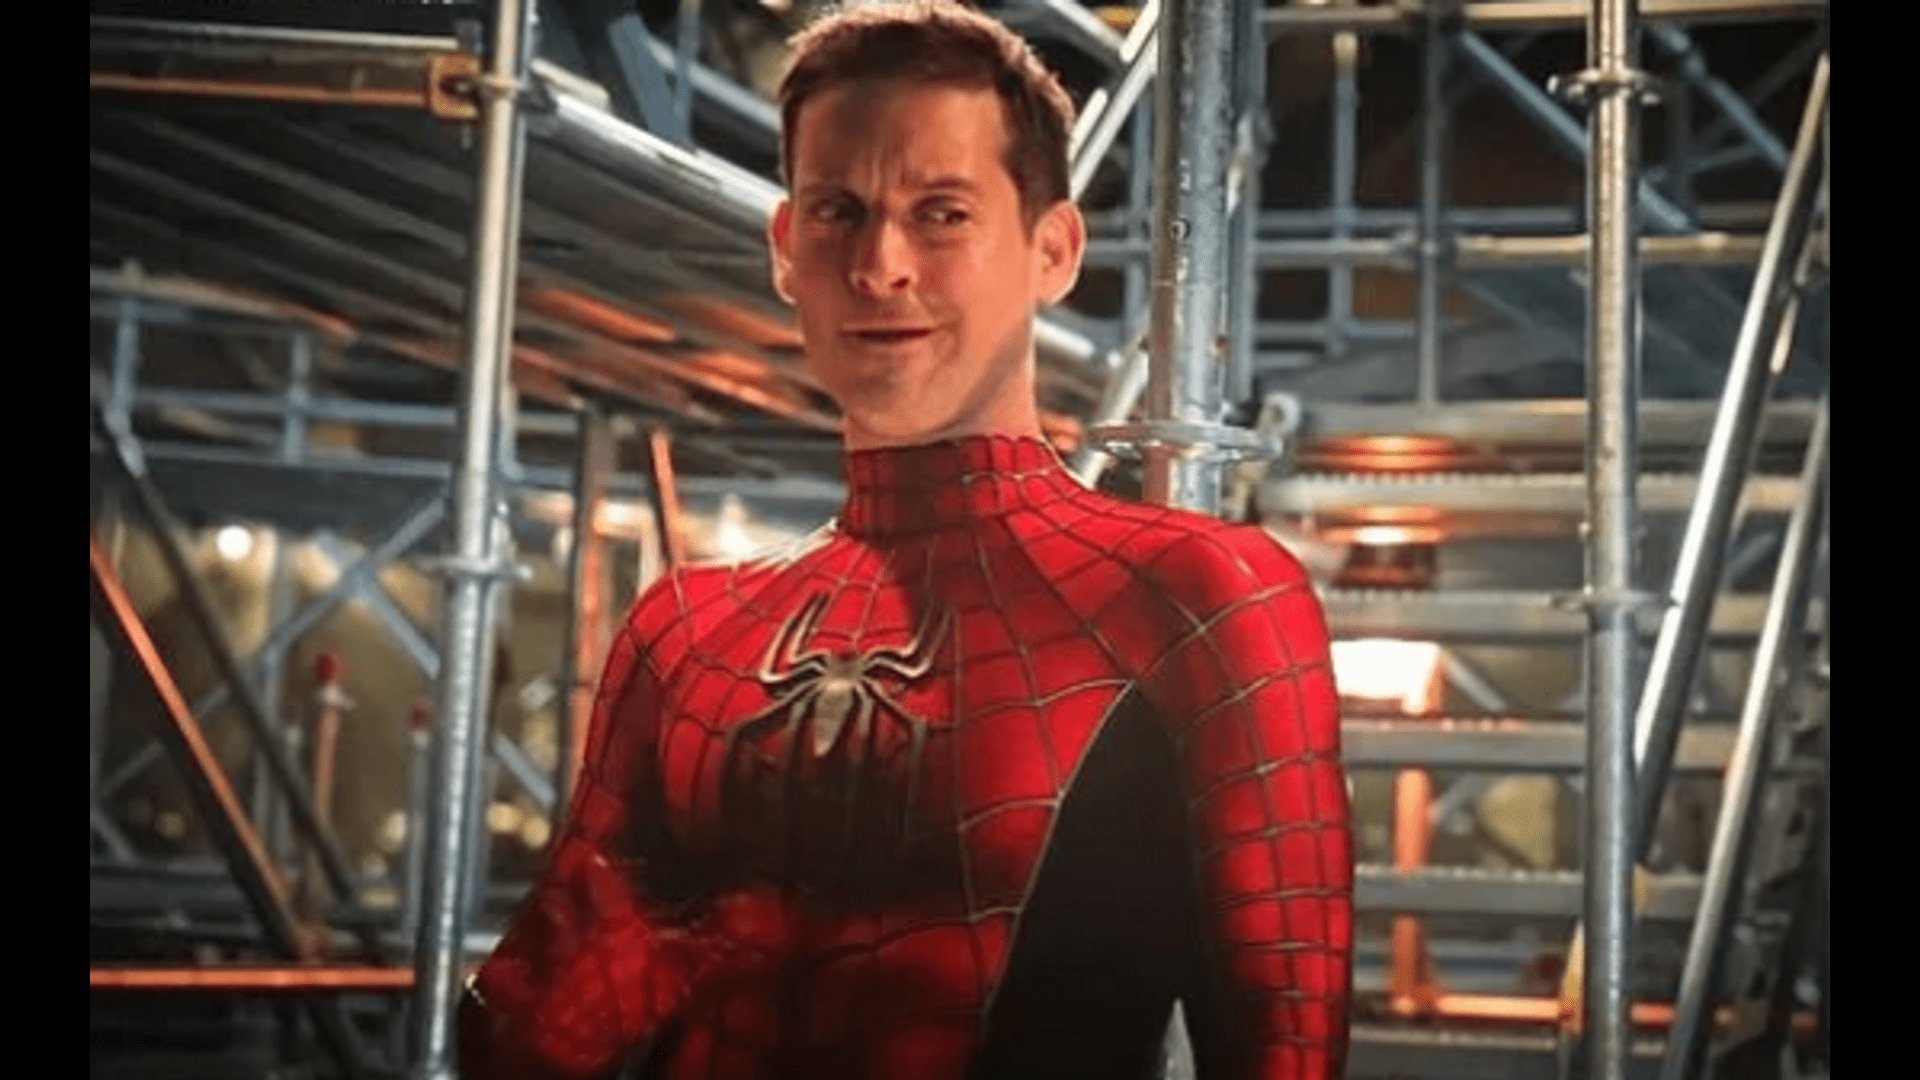 Director Sam Raimi hinted at the continuation of "Spider-Man" with Tobey Maguire